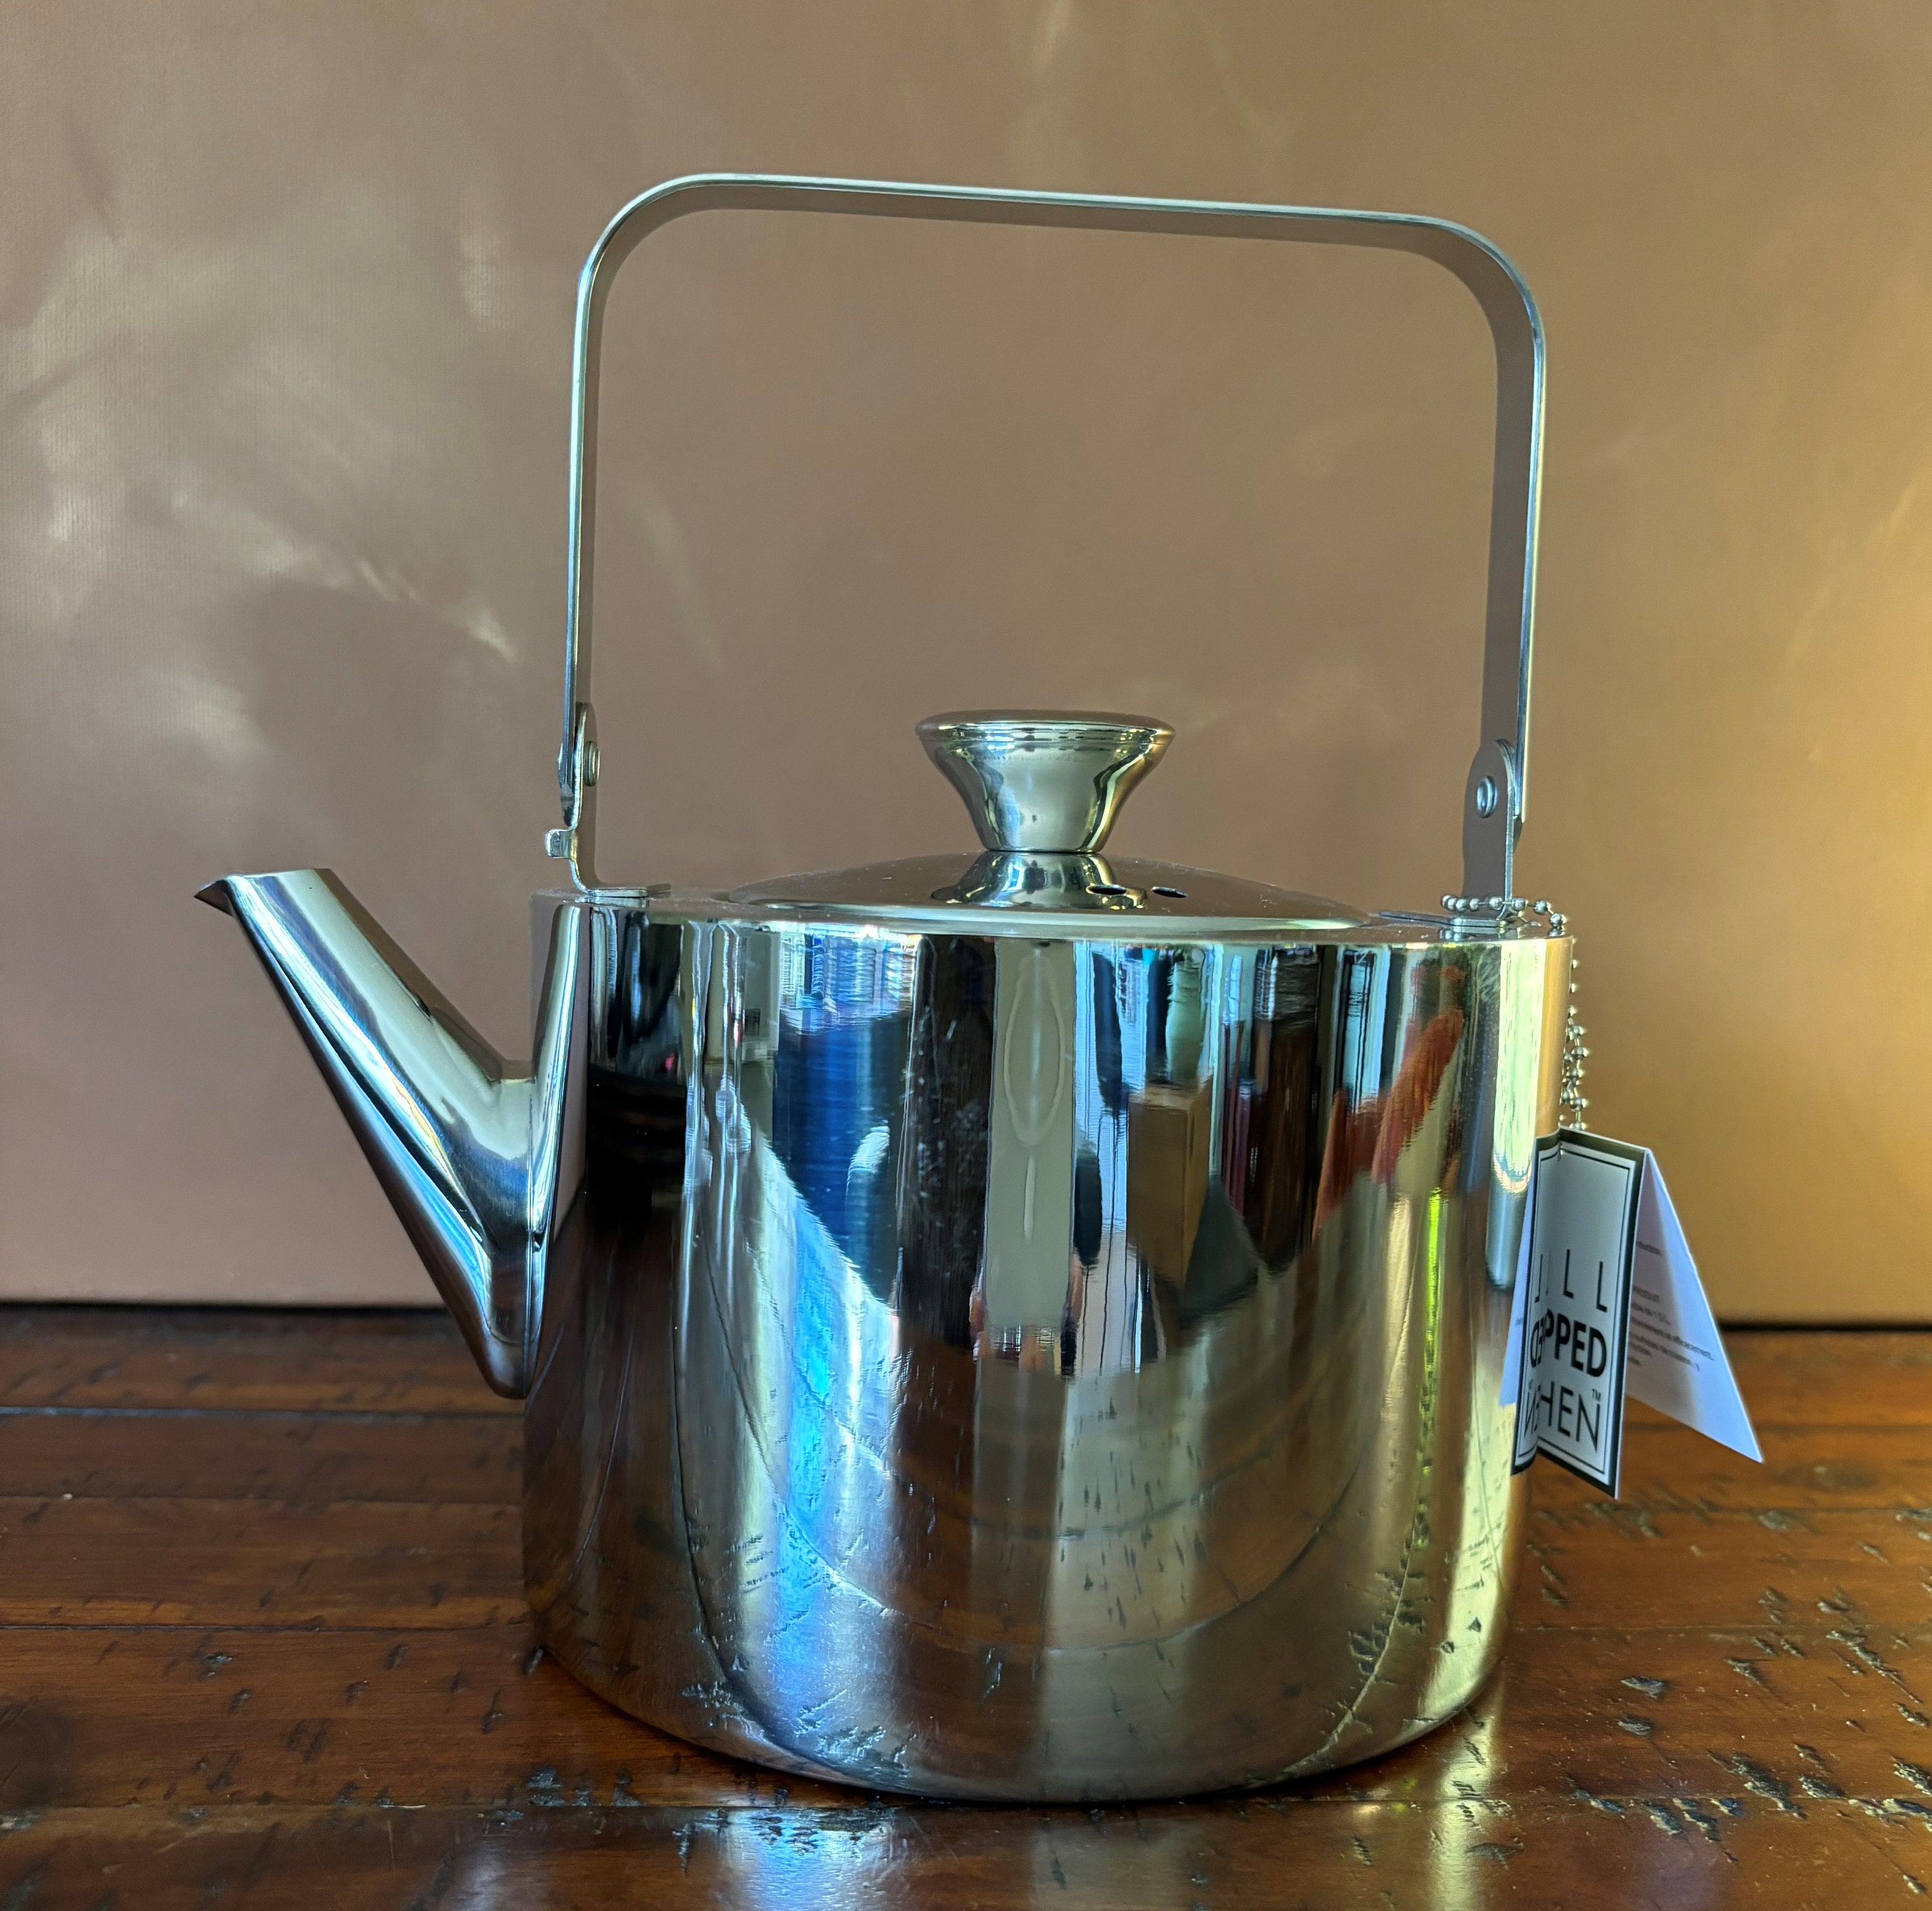 New All-clad Stainless Steel 2 Qt Tea Kettle in Original Box 